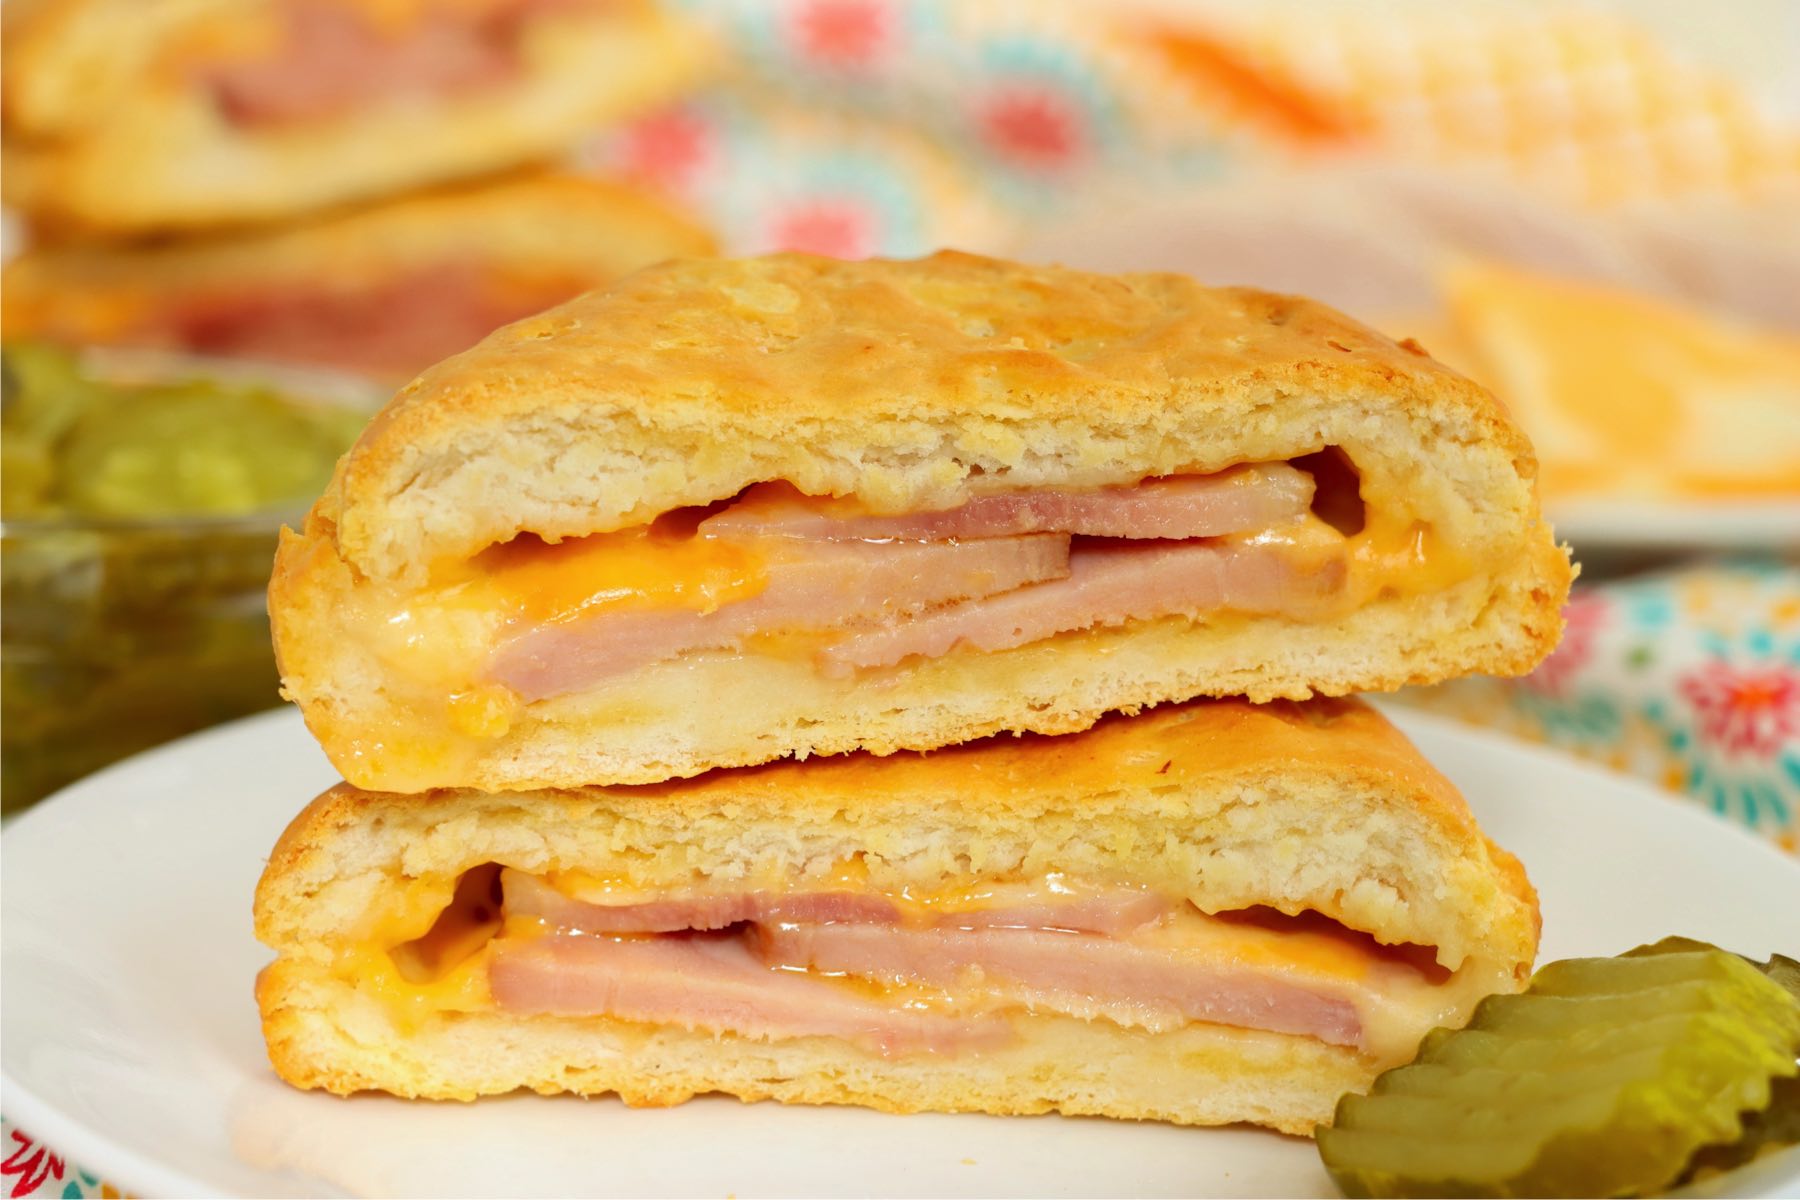 Inside look at a ham and cheese hot pocket